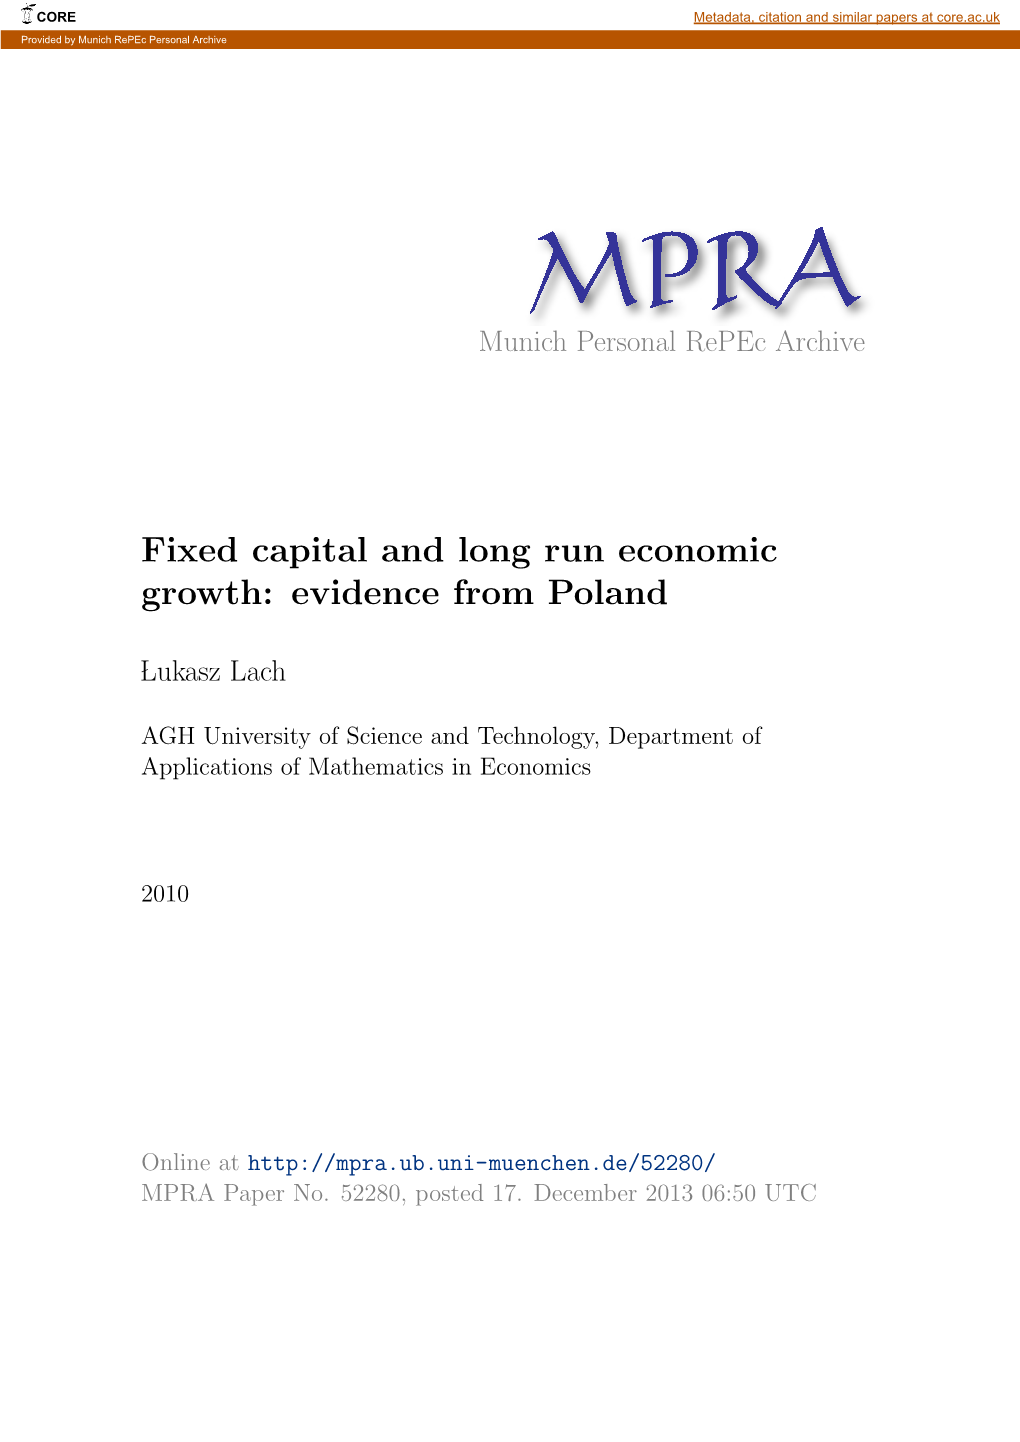 Fixed Capital and Long Run Economic Growth: Evidence from Poland